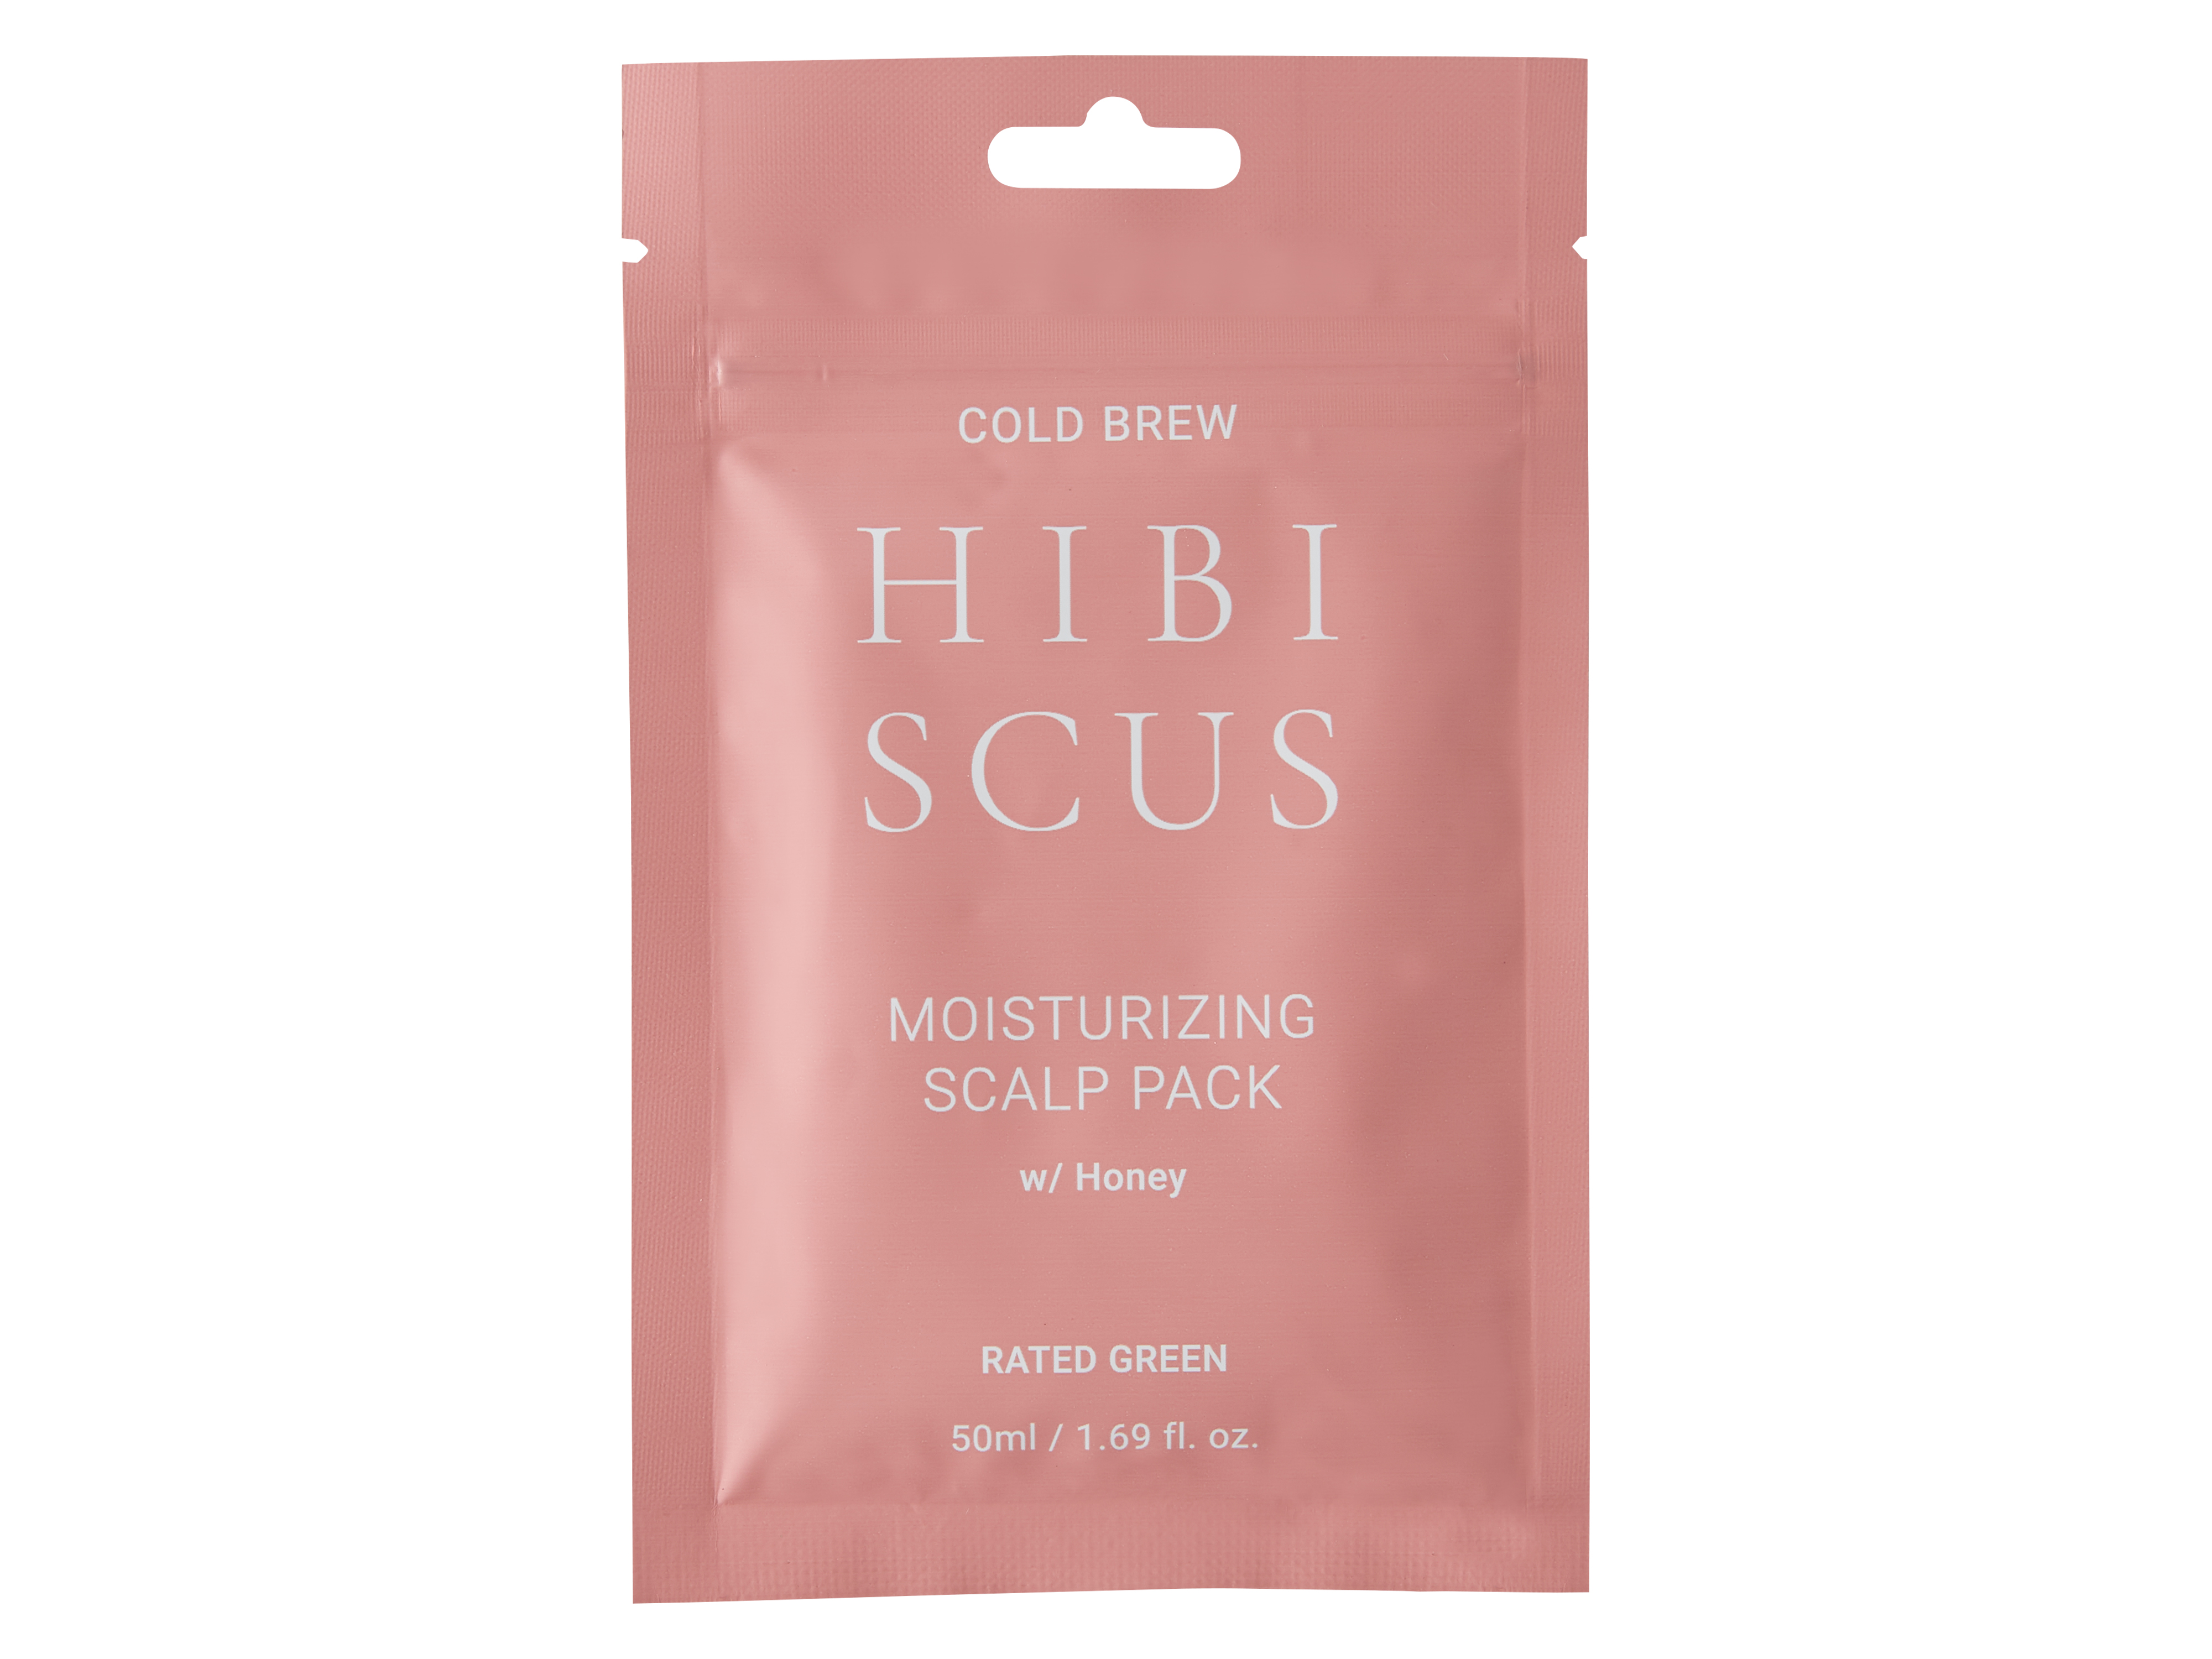 Rated Green Cold Brew Hibiscus Moisturizing Scalp Pack, 50 ml